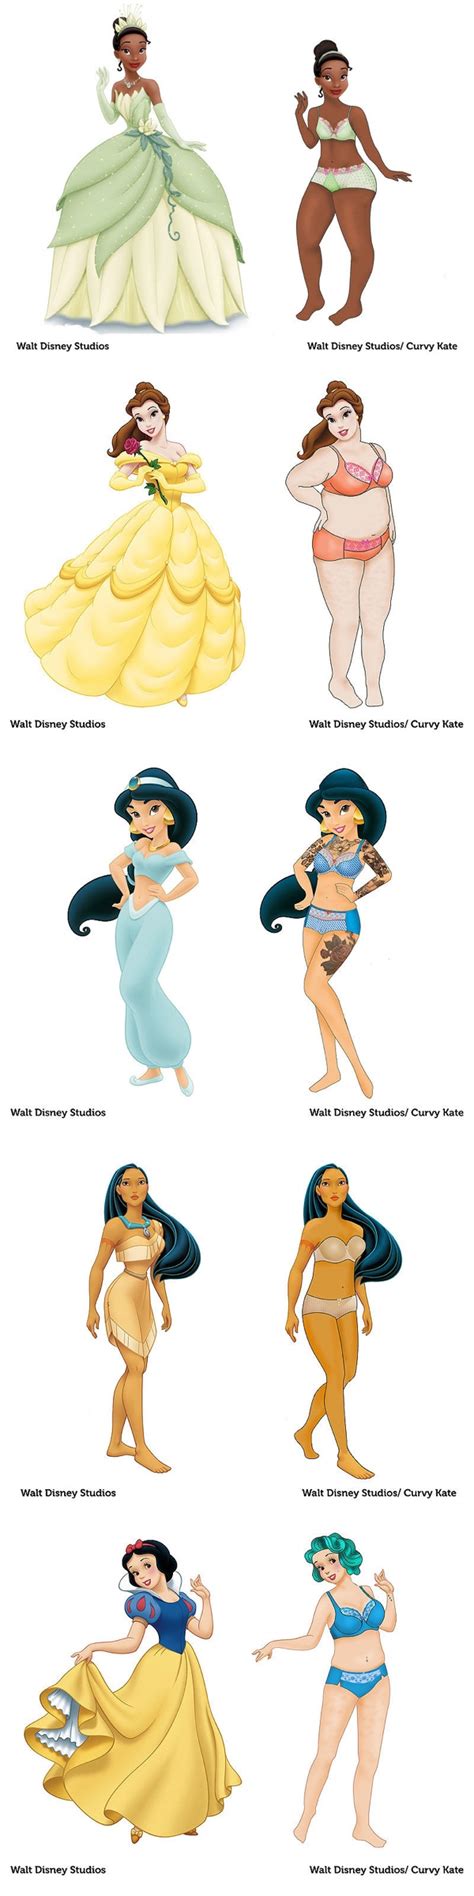 Someone Drew The Disney Princesses With Normal Bodies And They Look Beautiful